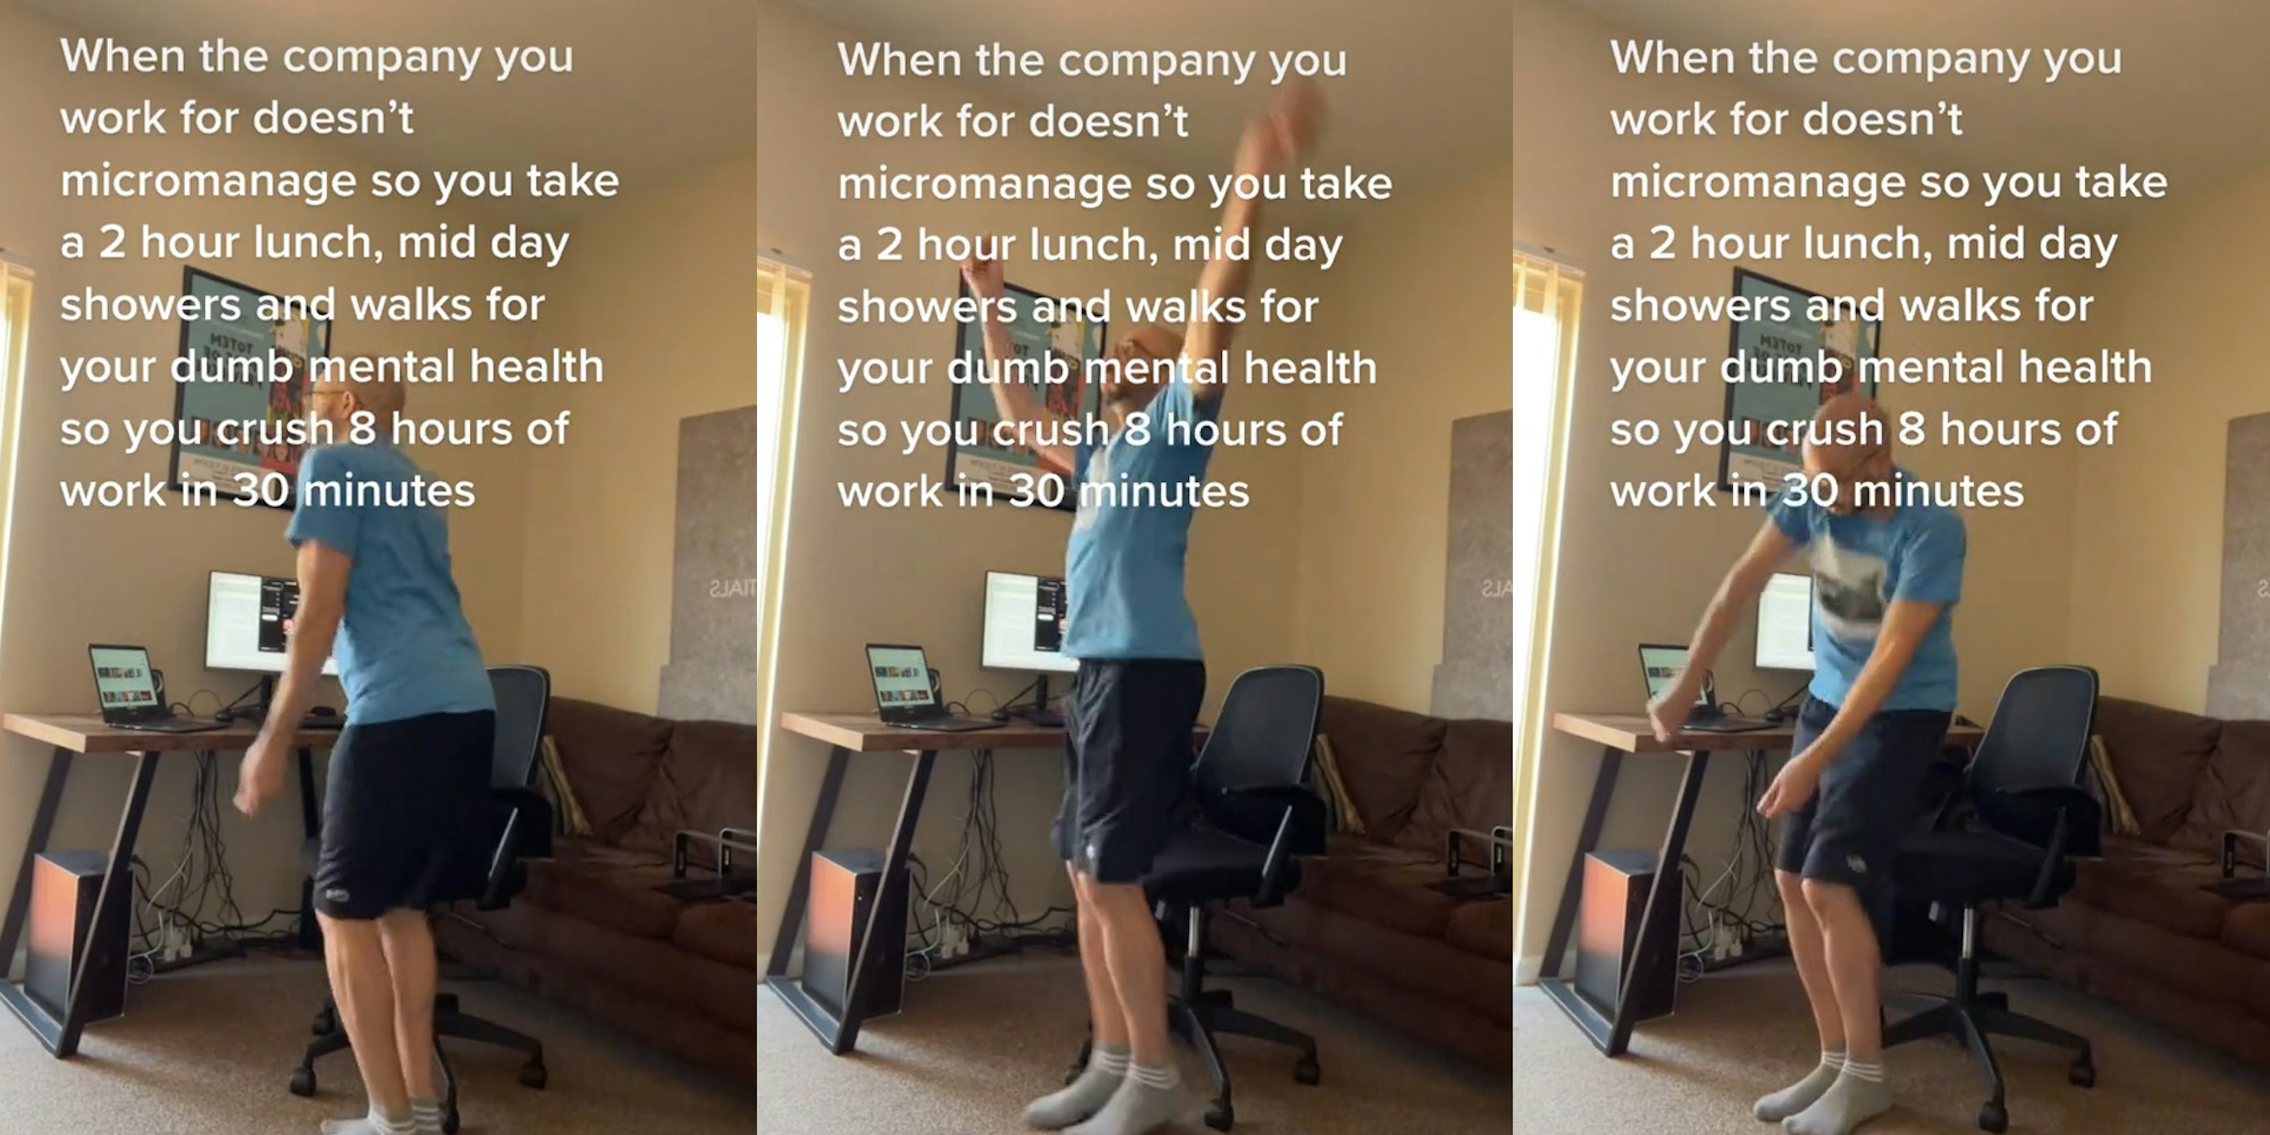 man dancing inside next to computer desk caption 'When the company you work for doesn't micromanage so you take a 2 hour lunch. mid day showers and walks for your dumb mental health so you crush 8 hours of work in 30 minutes' (l) man dancing inside next to computer desk caption 'When the company you work for doesn't micromanage so you take a 2 hour lunch. mid day showers and walks for your dumb mental health so you crush 8 hours of work in 30 minutes' (c) man dancing inside next to computer desk caption 'When the company you work for doesn't micromanage so you take a 2 hour lunch. mid day showers and walks for your dumb mental health so you crush 8 hours of work in 30 minutes' (r)